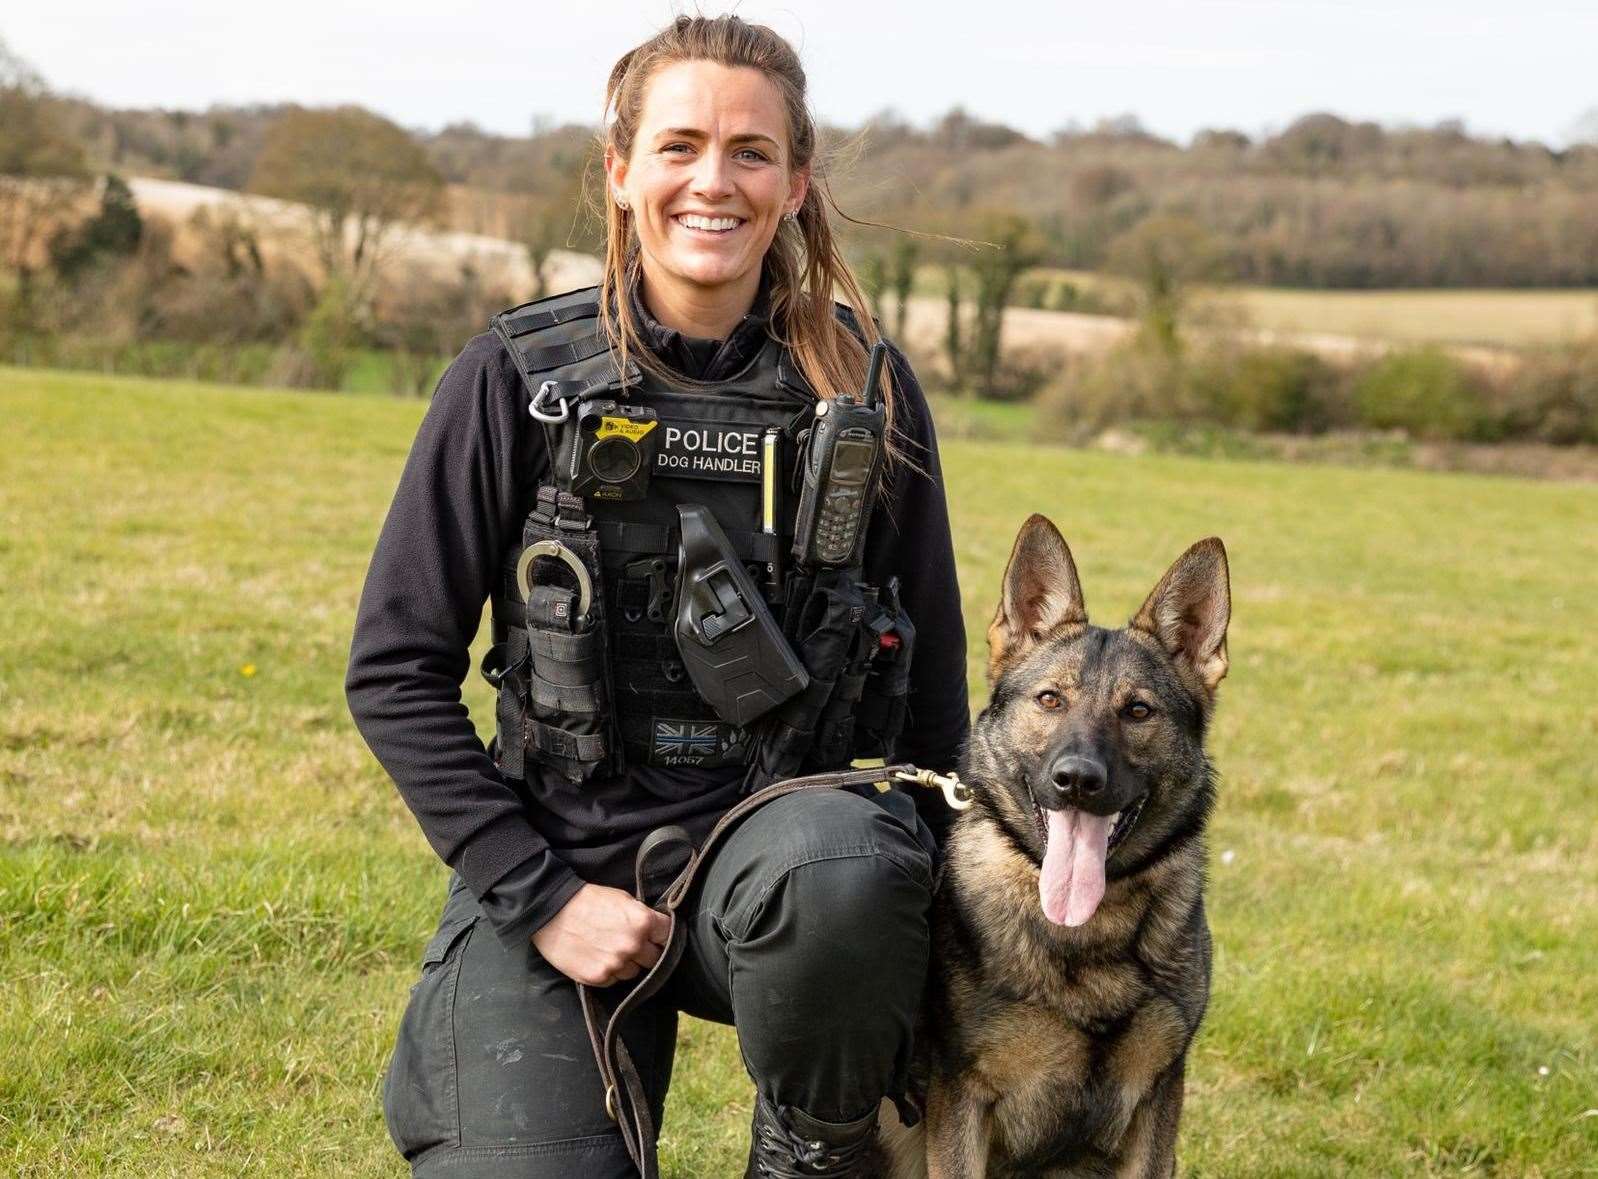 PC Megan West and PD Calli licensed in November before hitting the streets the following month